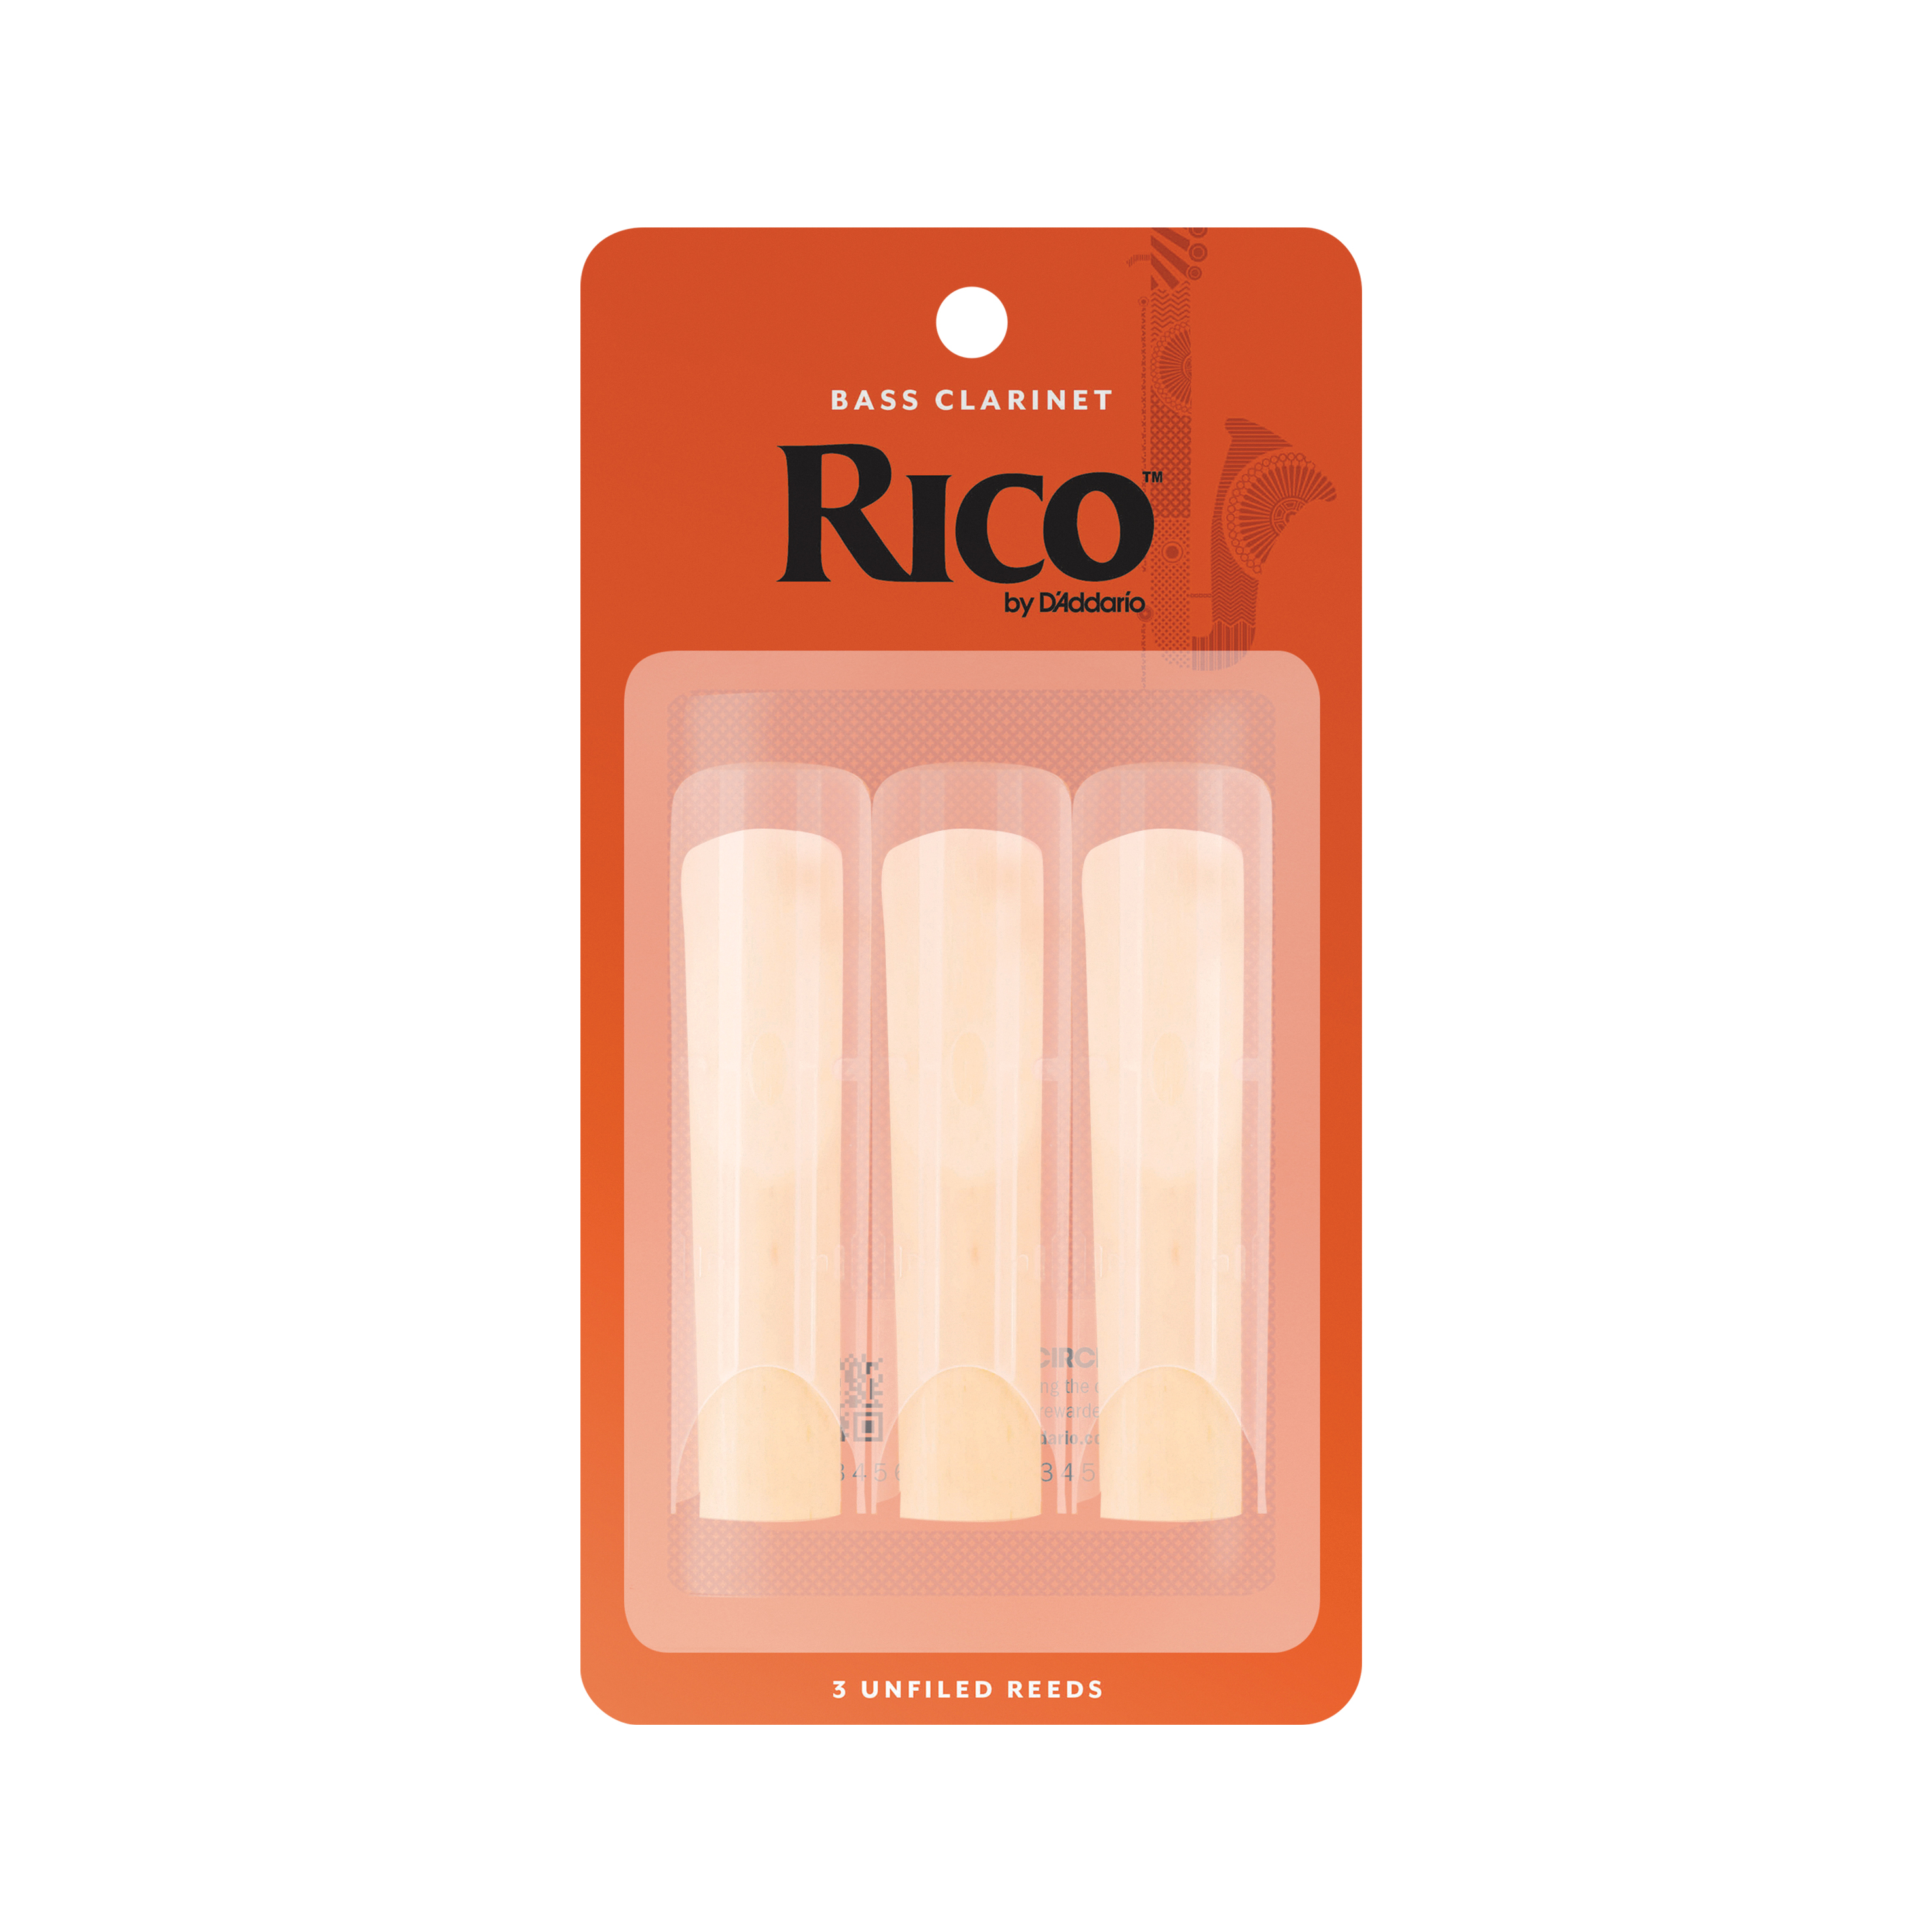 Orange Three pack of Rico by D'addario Bass Clarinet reeds, strength two